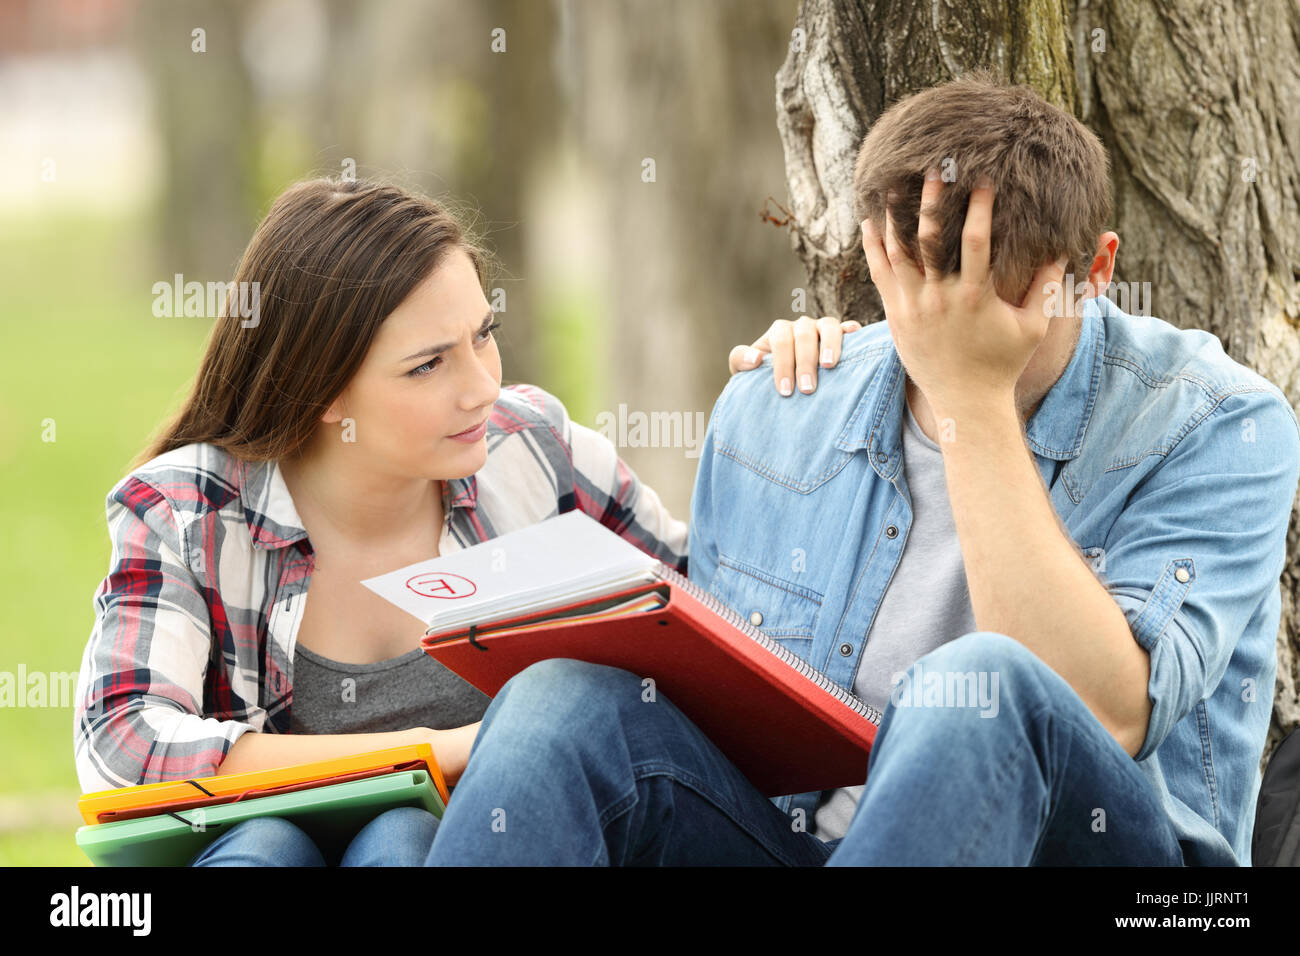 Friend comforting to a sad student with failed exam sitting on the grass in a park Stock Photo